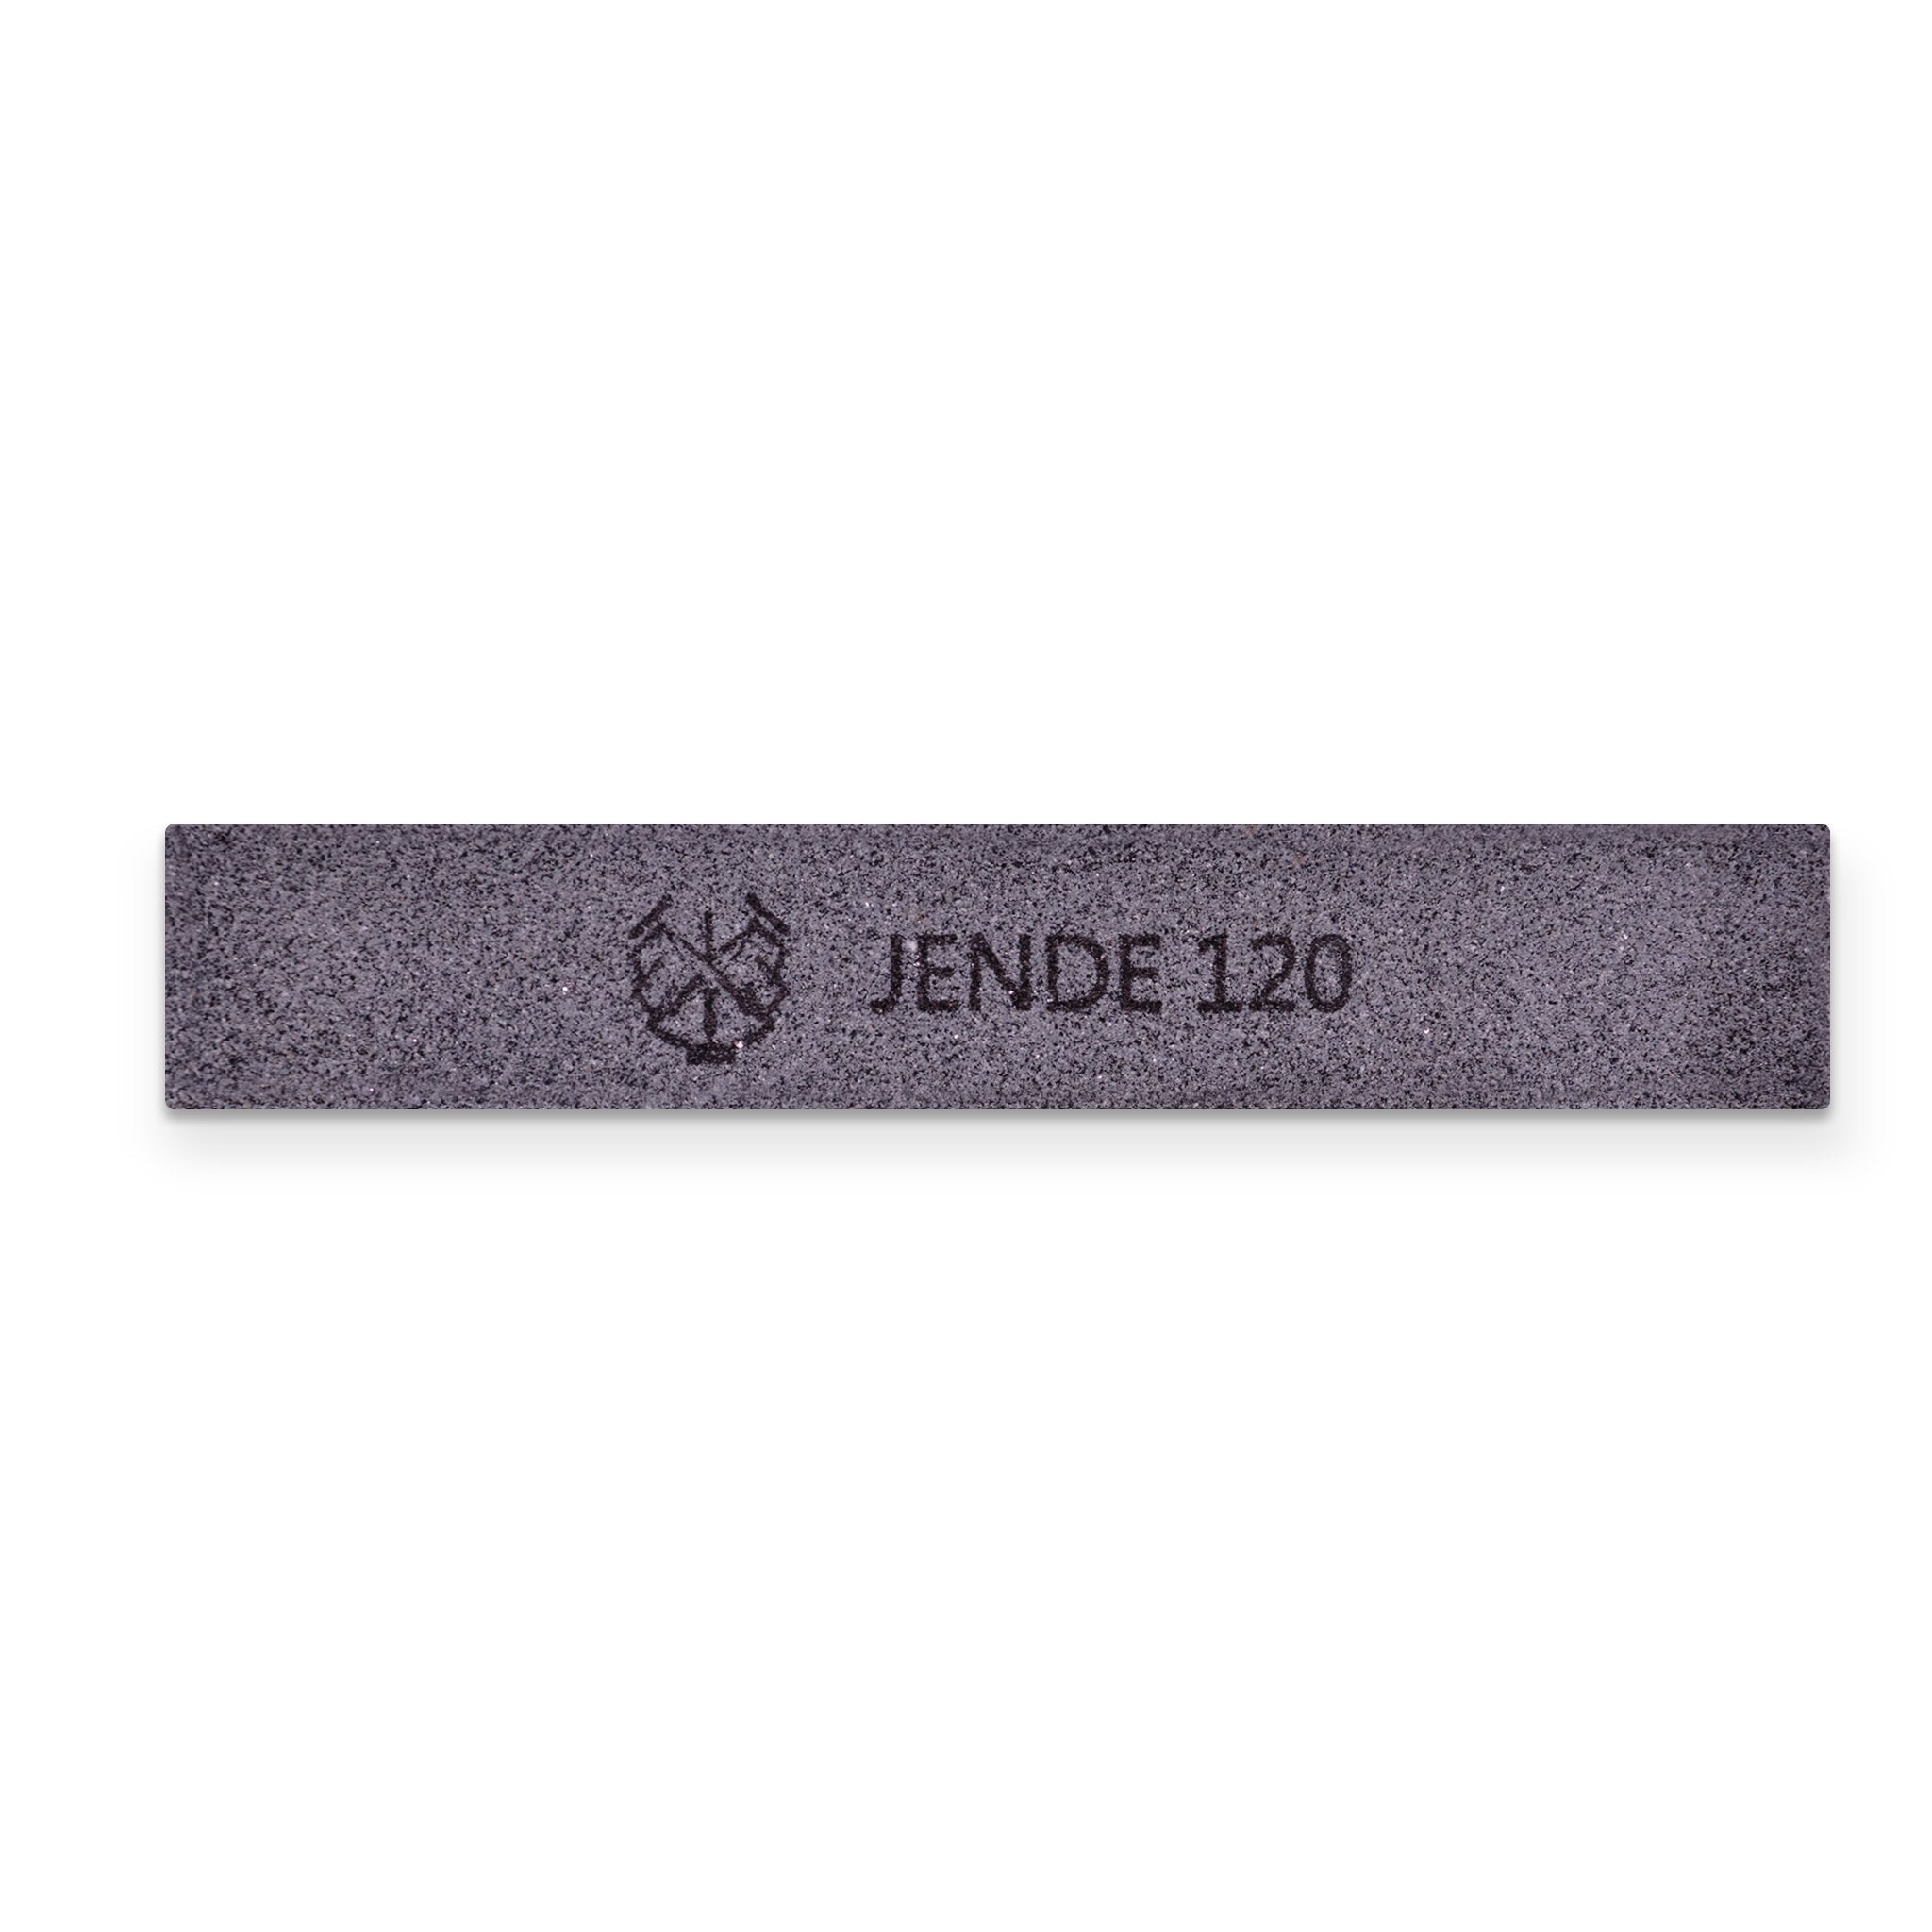 1x6 Jende Silicone Carbide Stones to suit TSPROF, HAPSTONE, Edgepro, JIGS